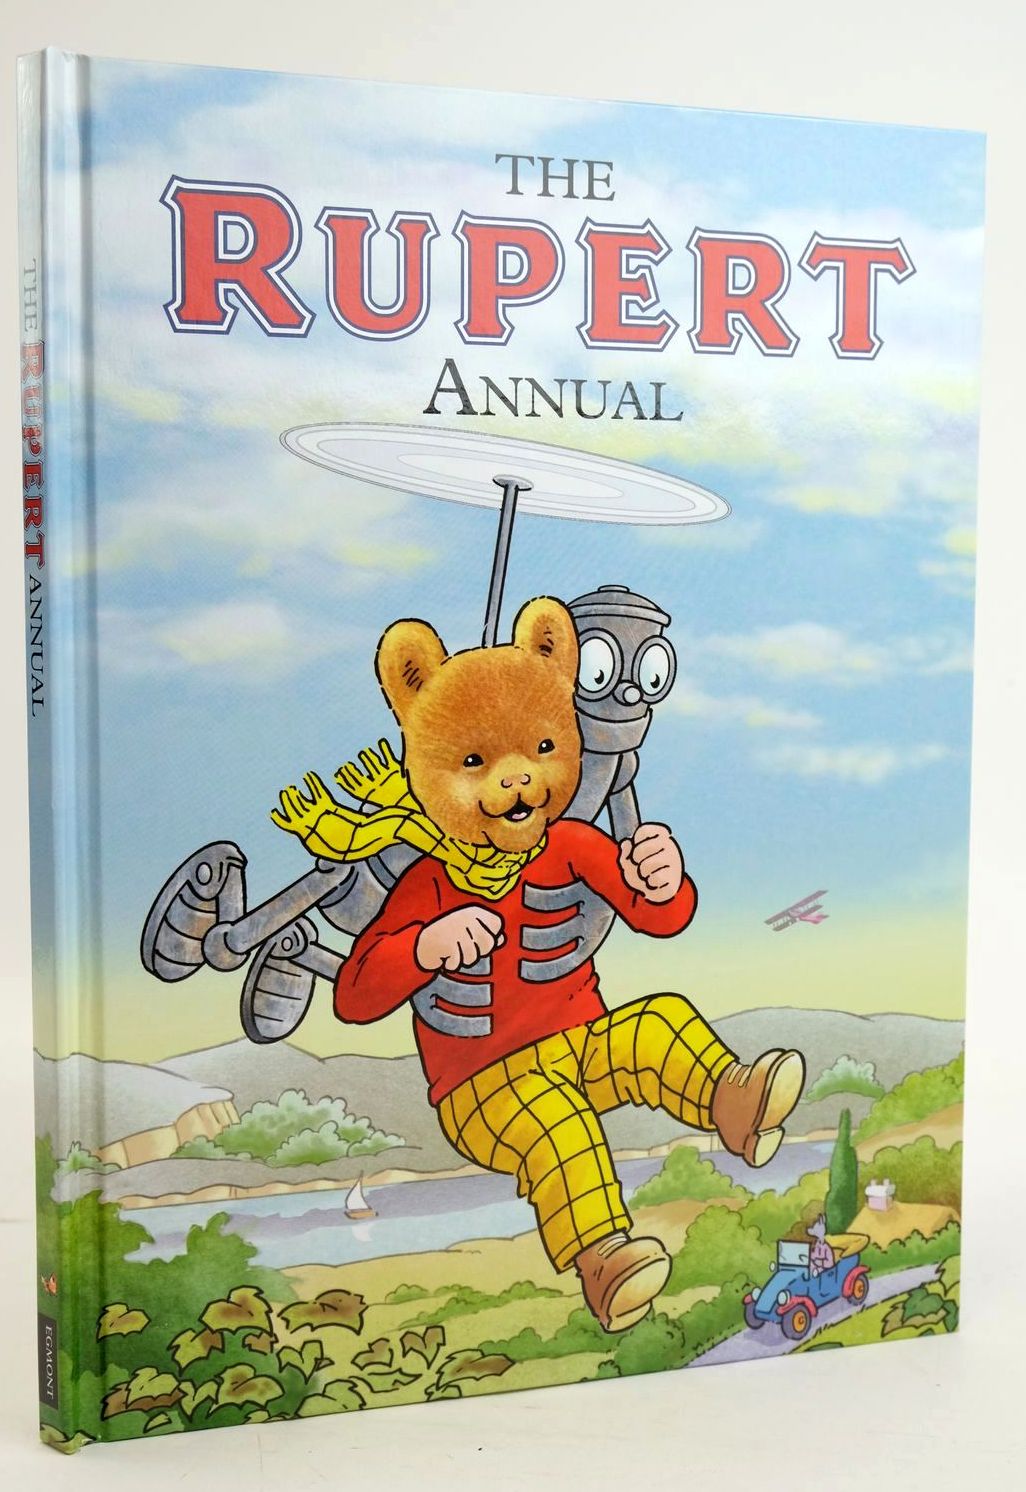 Photo of RUPERT ANNUAL 2011 written by Bestall, Alfred Harwood, Beth illustrated by Bestall, Alfred Trotter, Stuart published by Egmont Uk Limited (STOCK CODE: 1319557)  for sale by Stella & Rose's Books